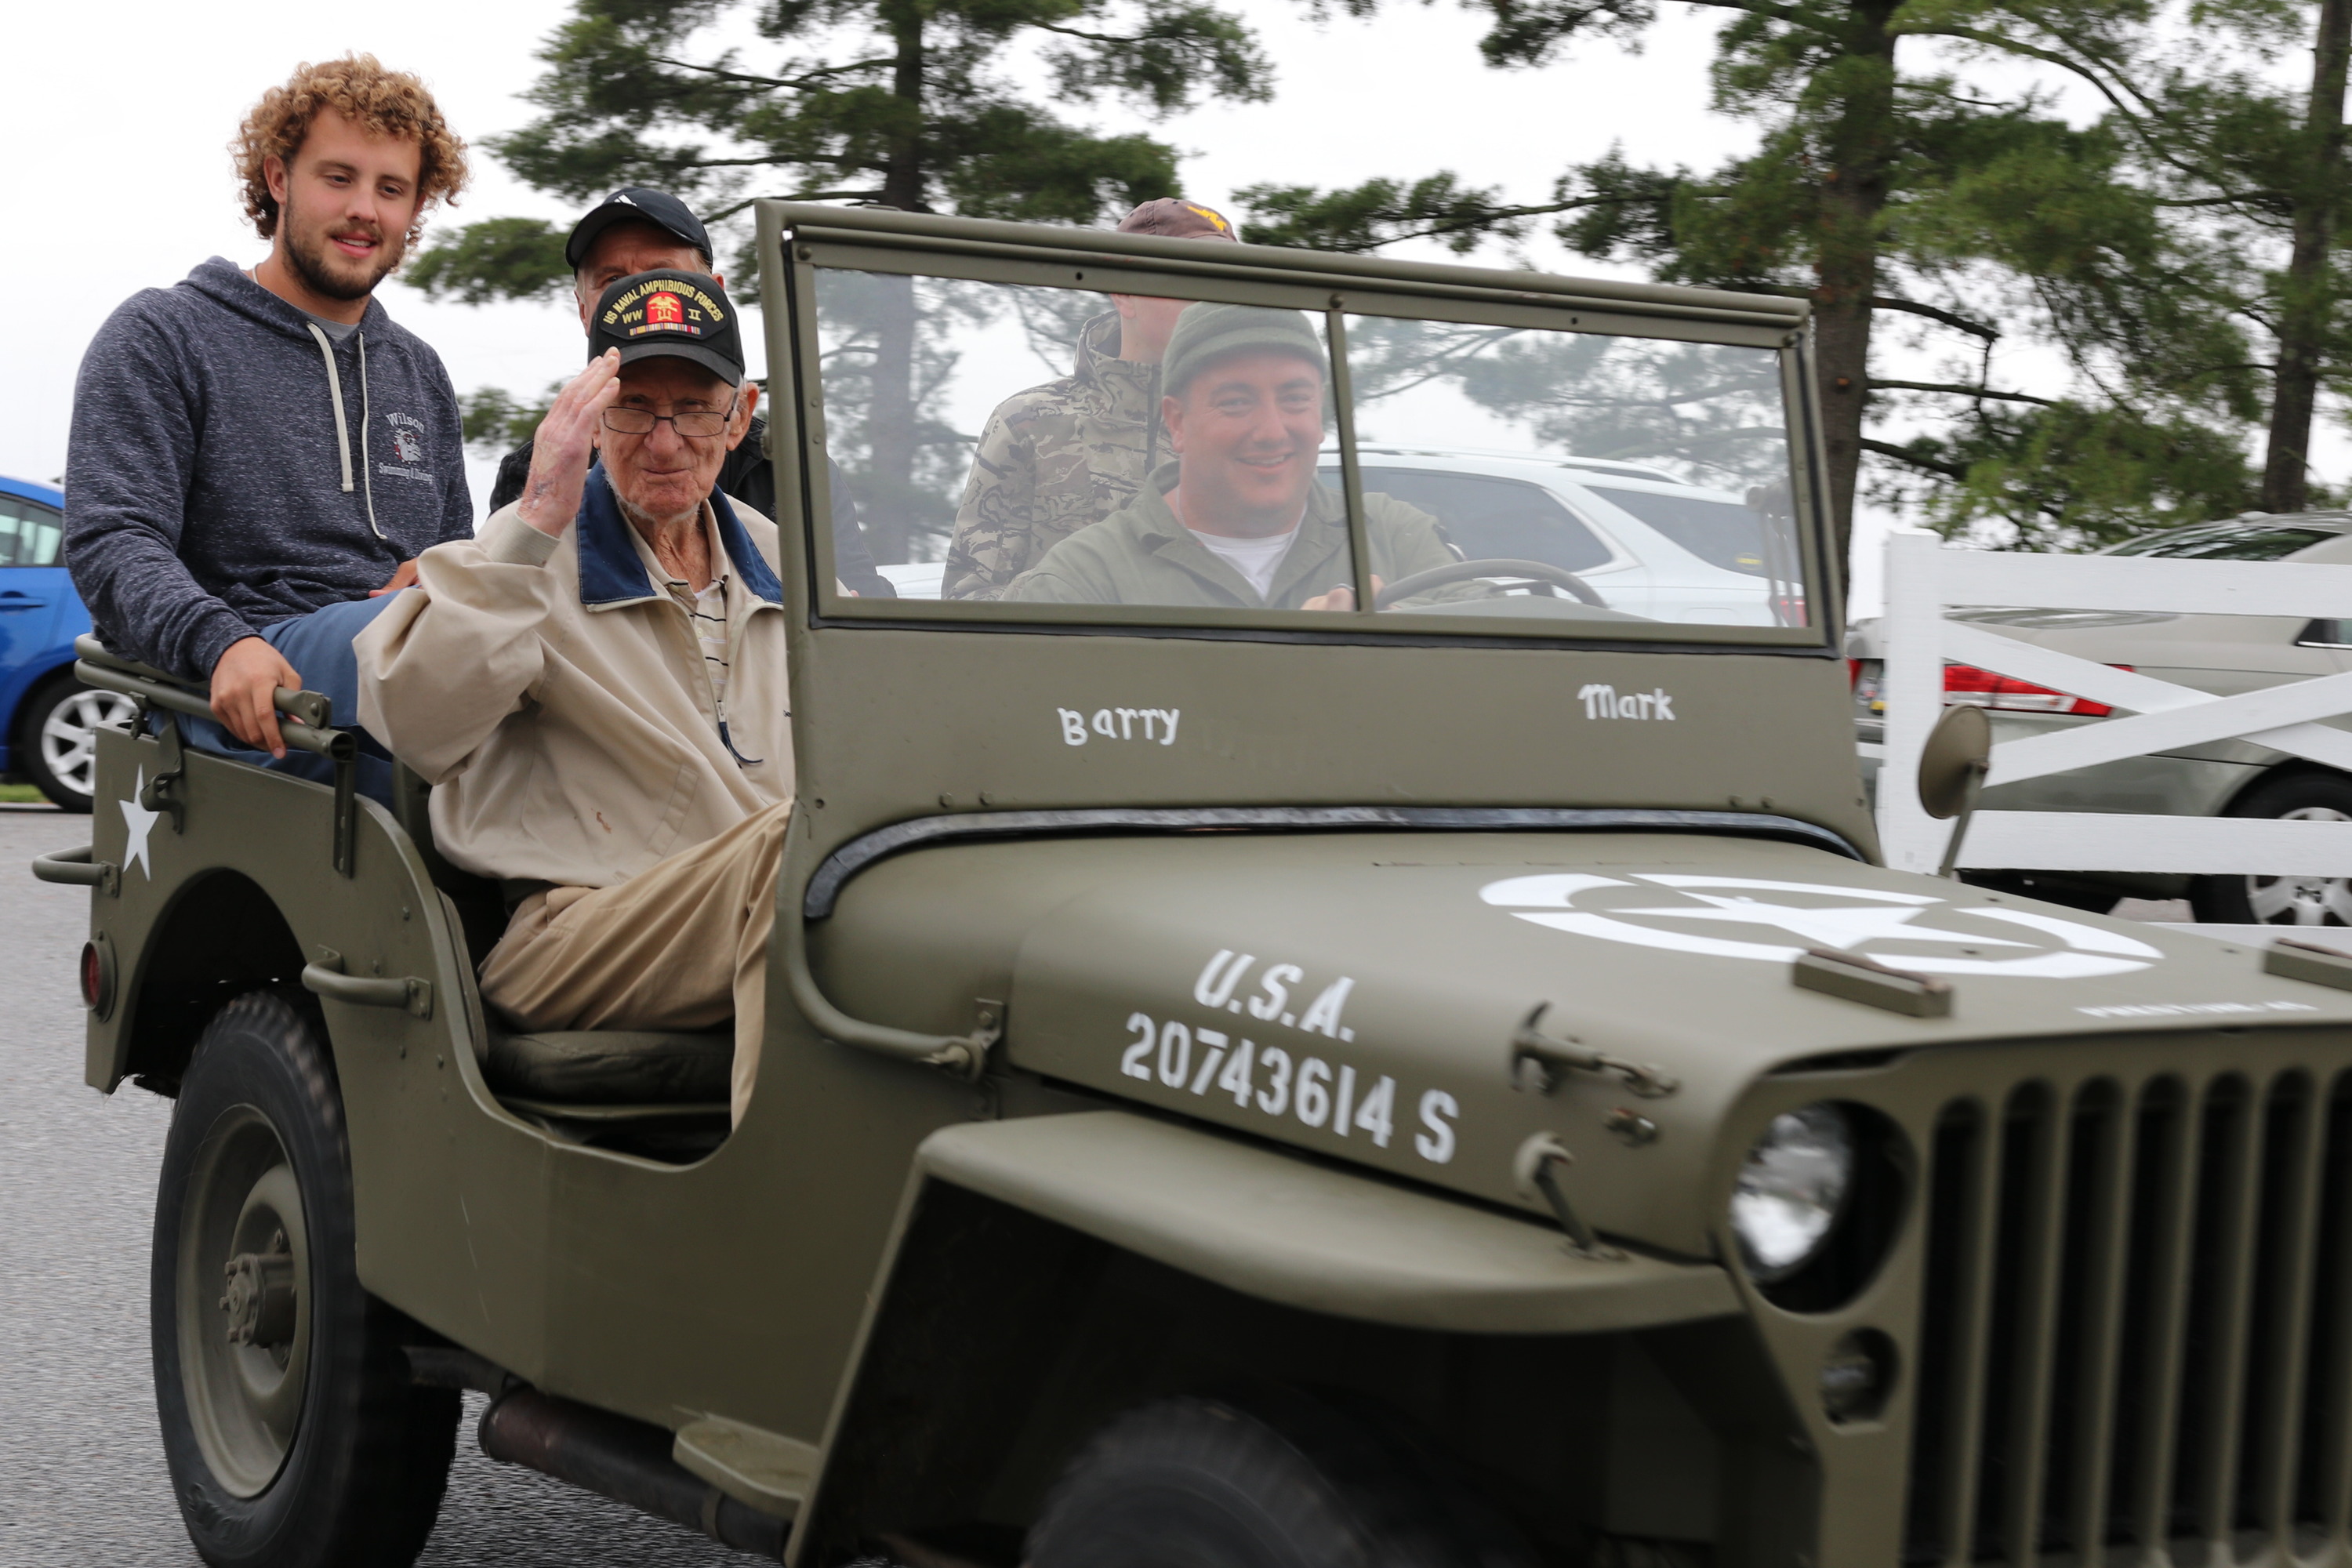 A man in a ballcap and jacket sits in the front seat of a Jeep, saluting the camera, with others seated behind him. 